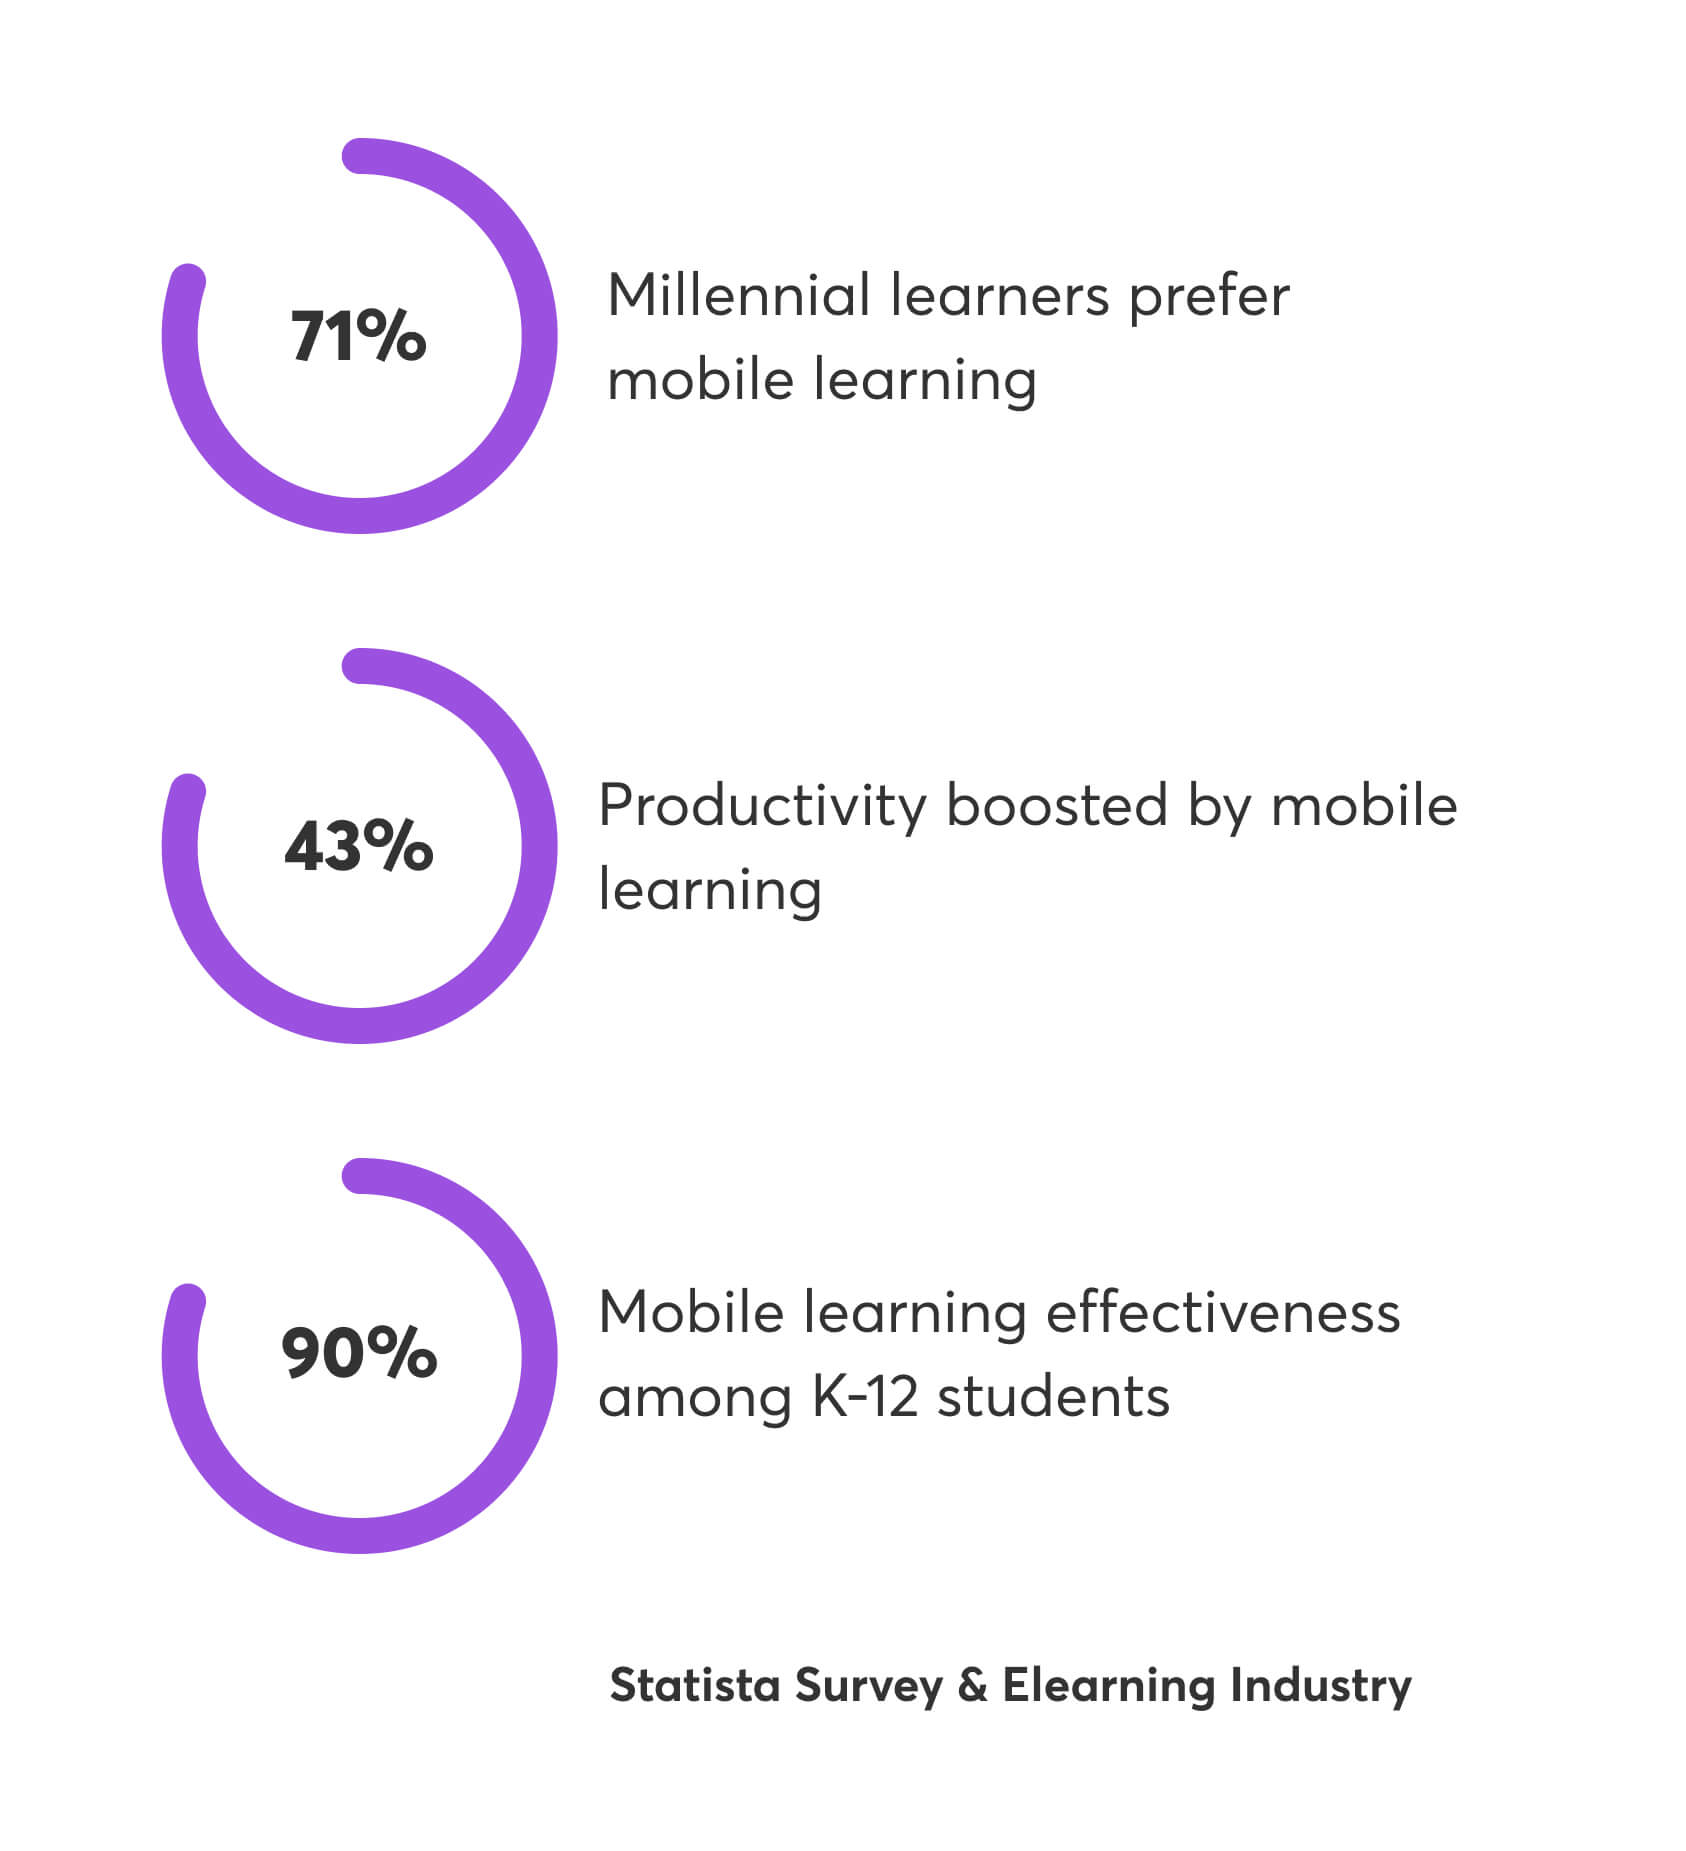 Mobile learning statistics on millenial learners, productivity boosted by mobile learning and k-12 learning effectiveness.